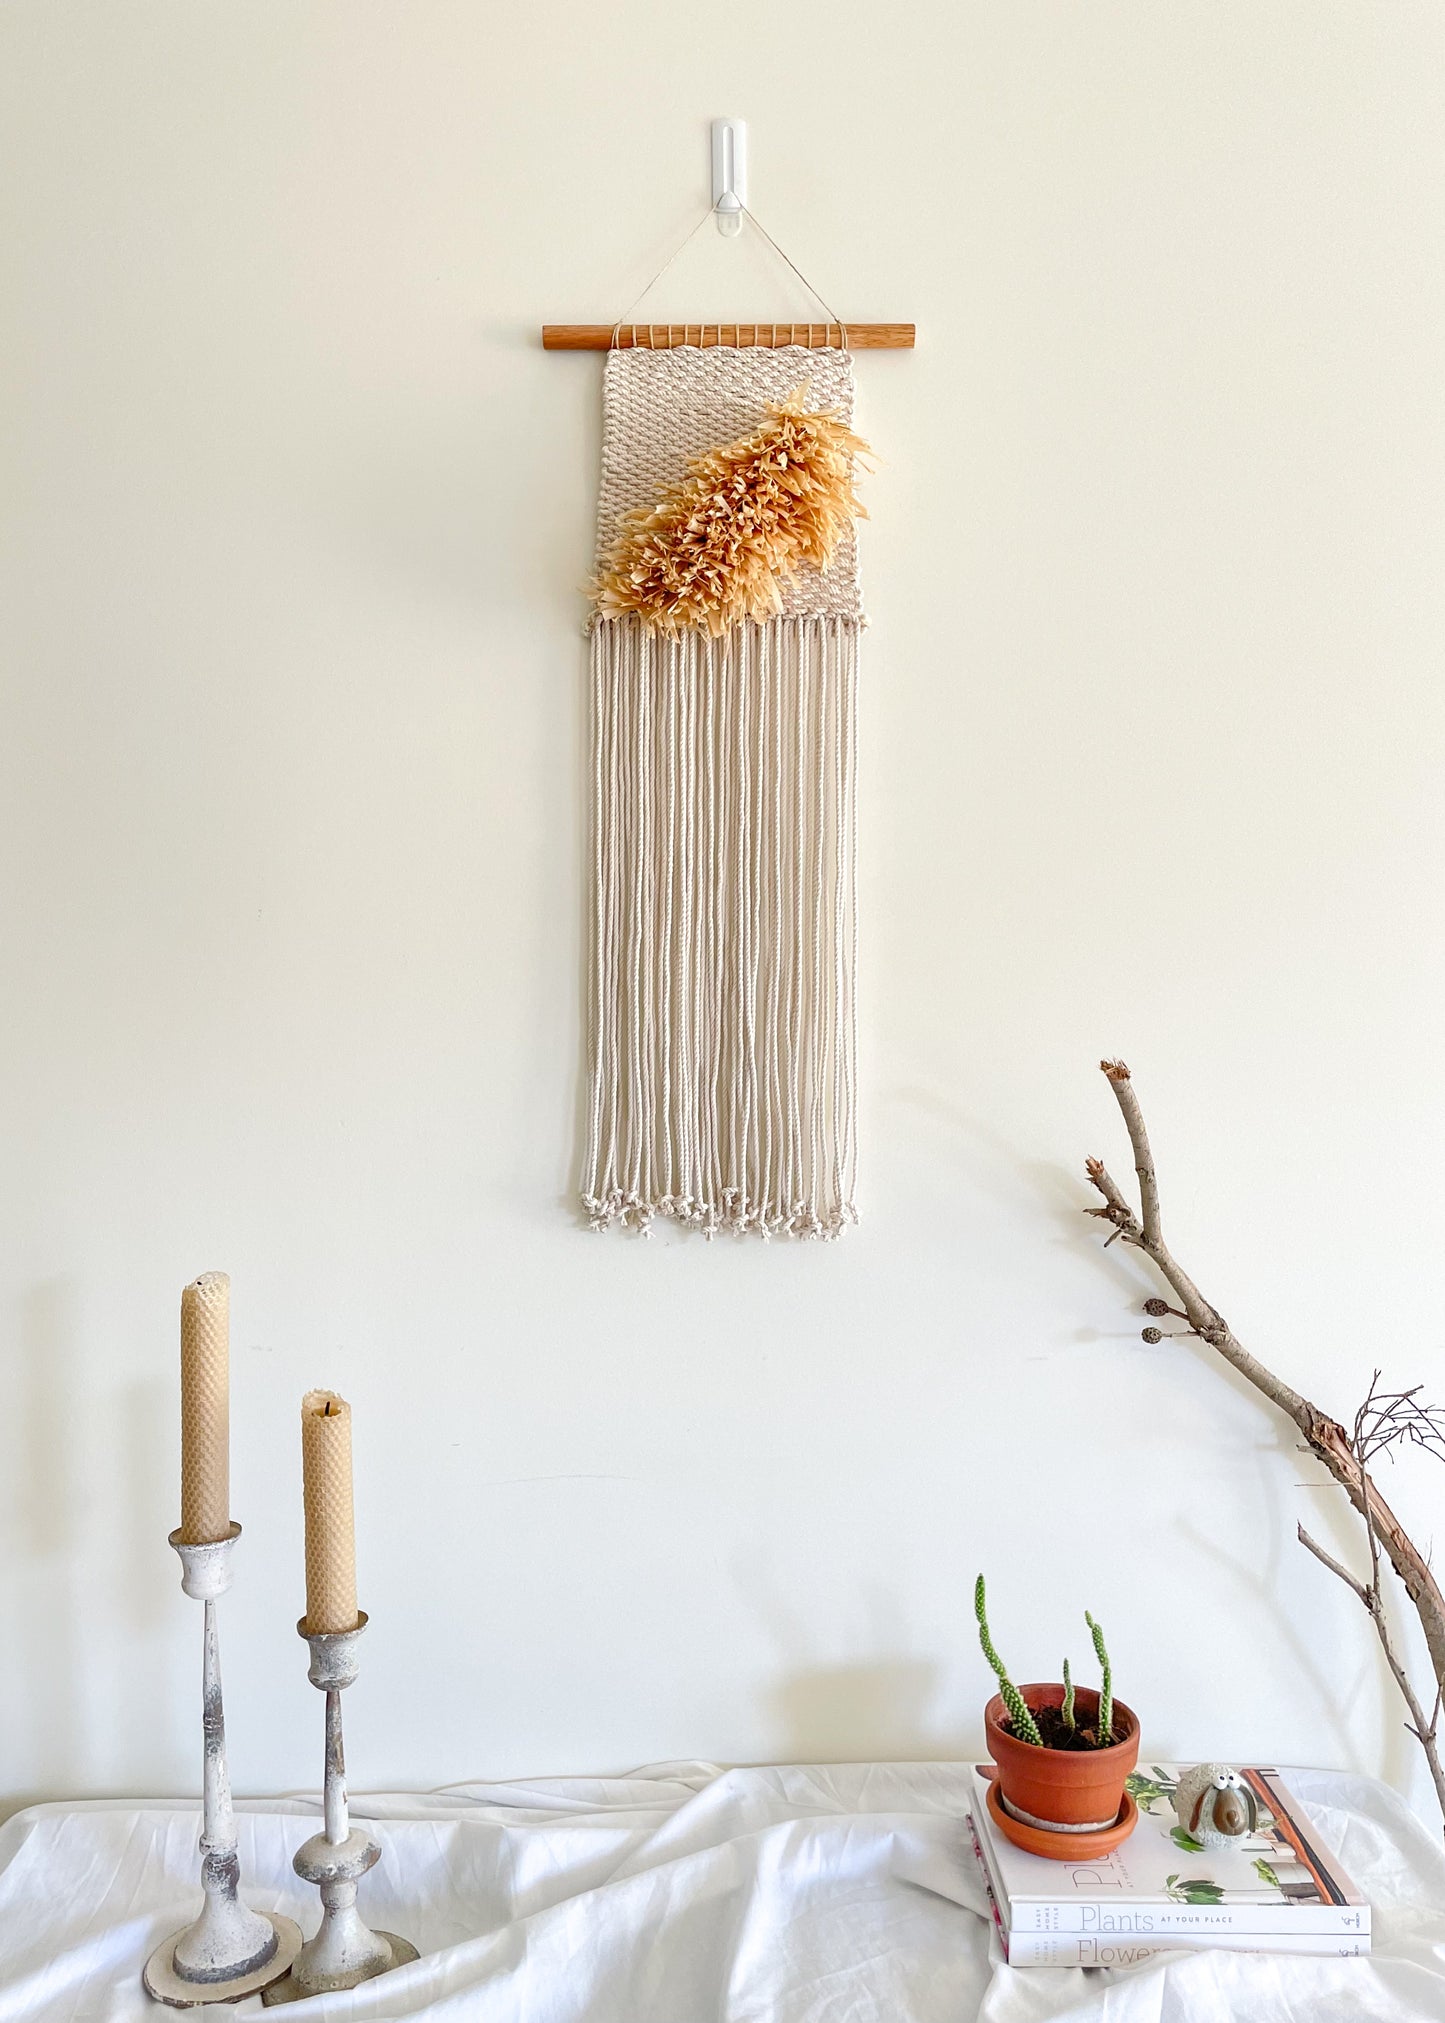 Raffia and cotton handwoven wall hanging hanged on a wall above a sideboard. styled with candles, books and a cactus potted plant